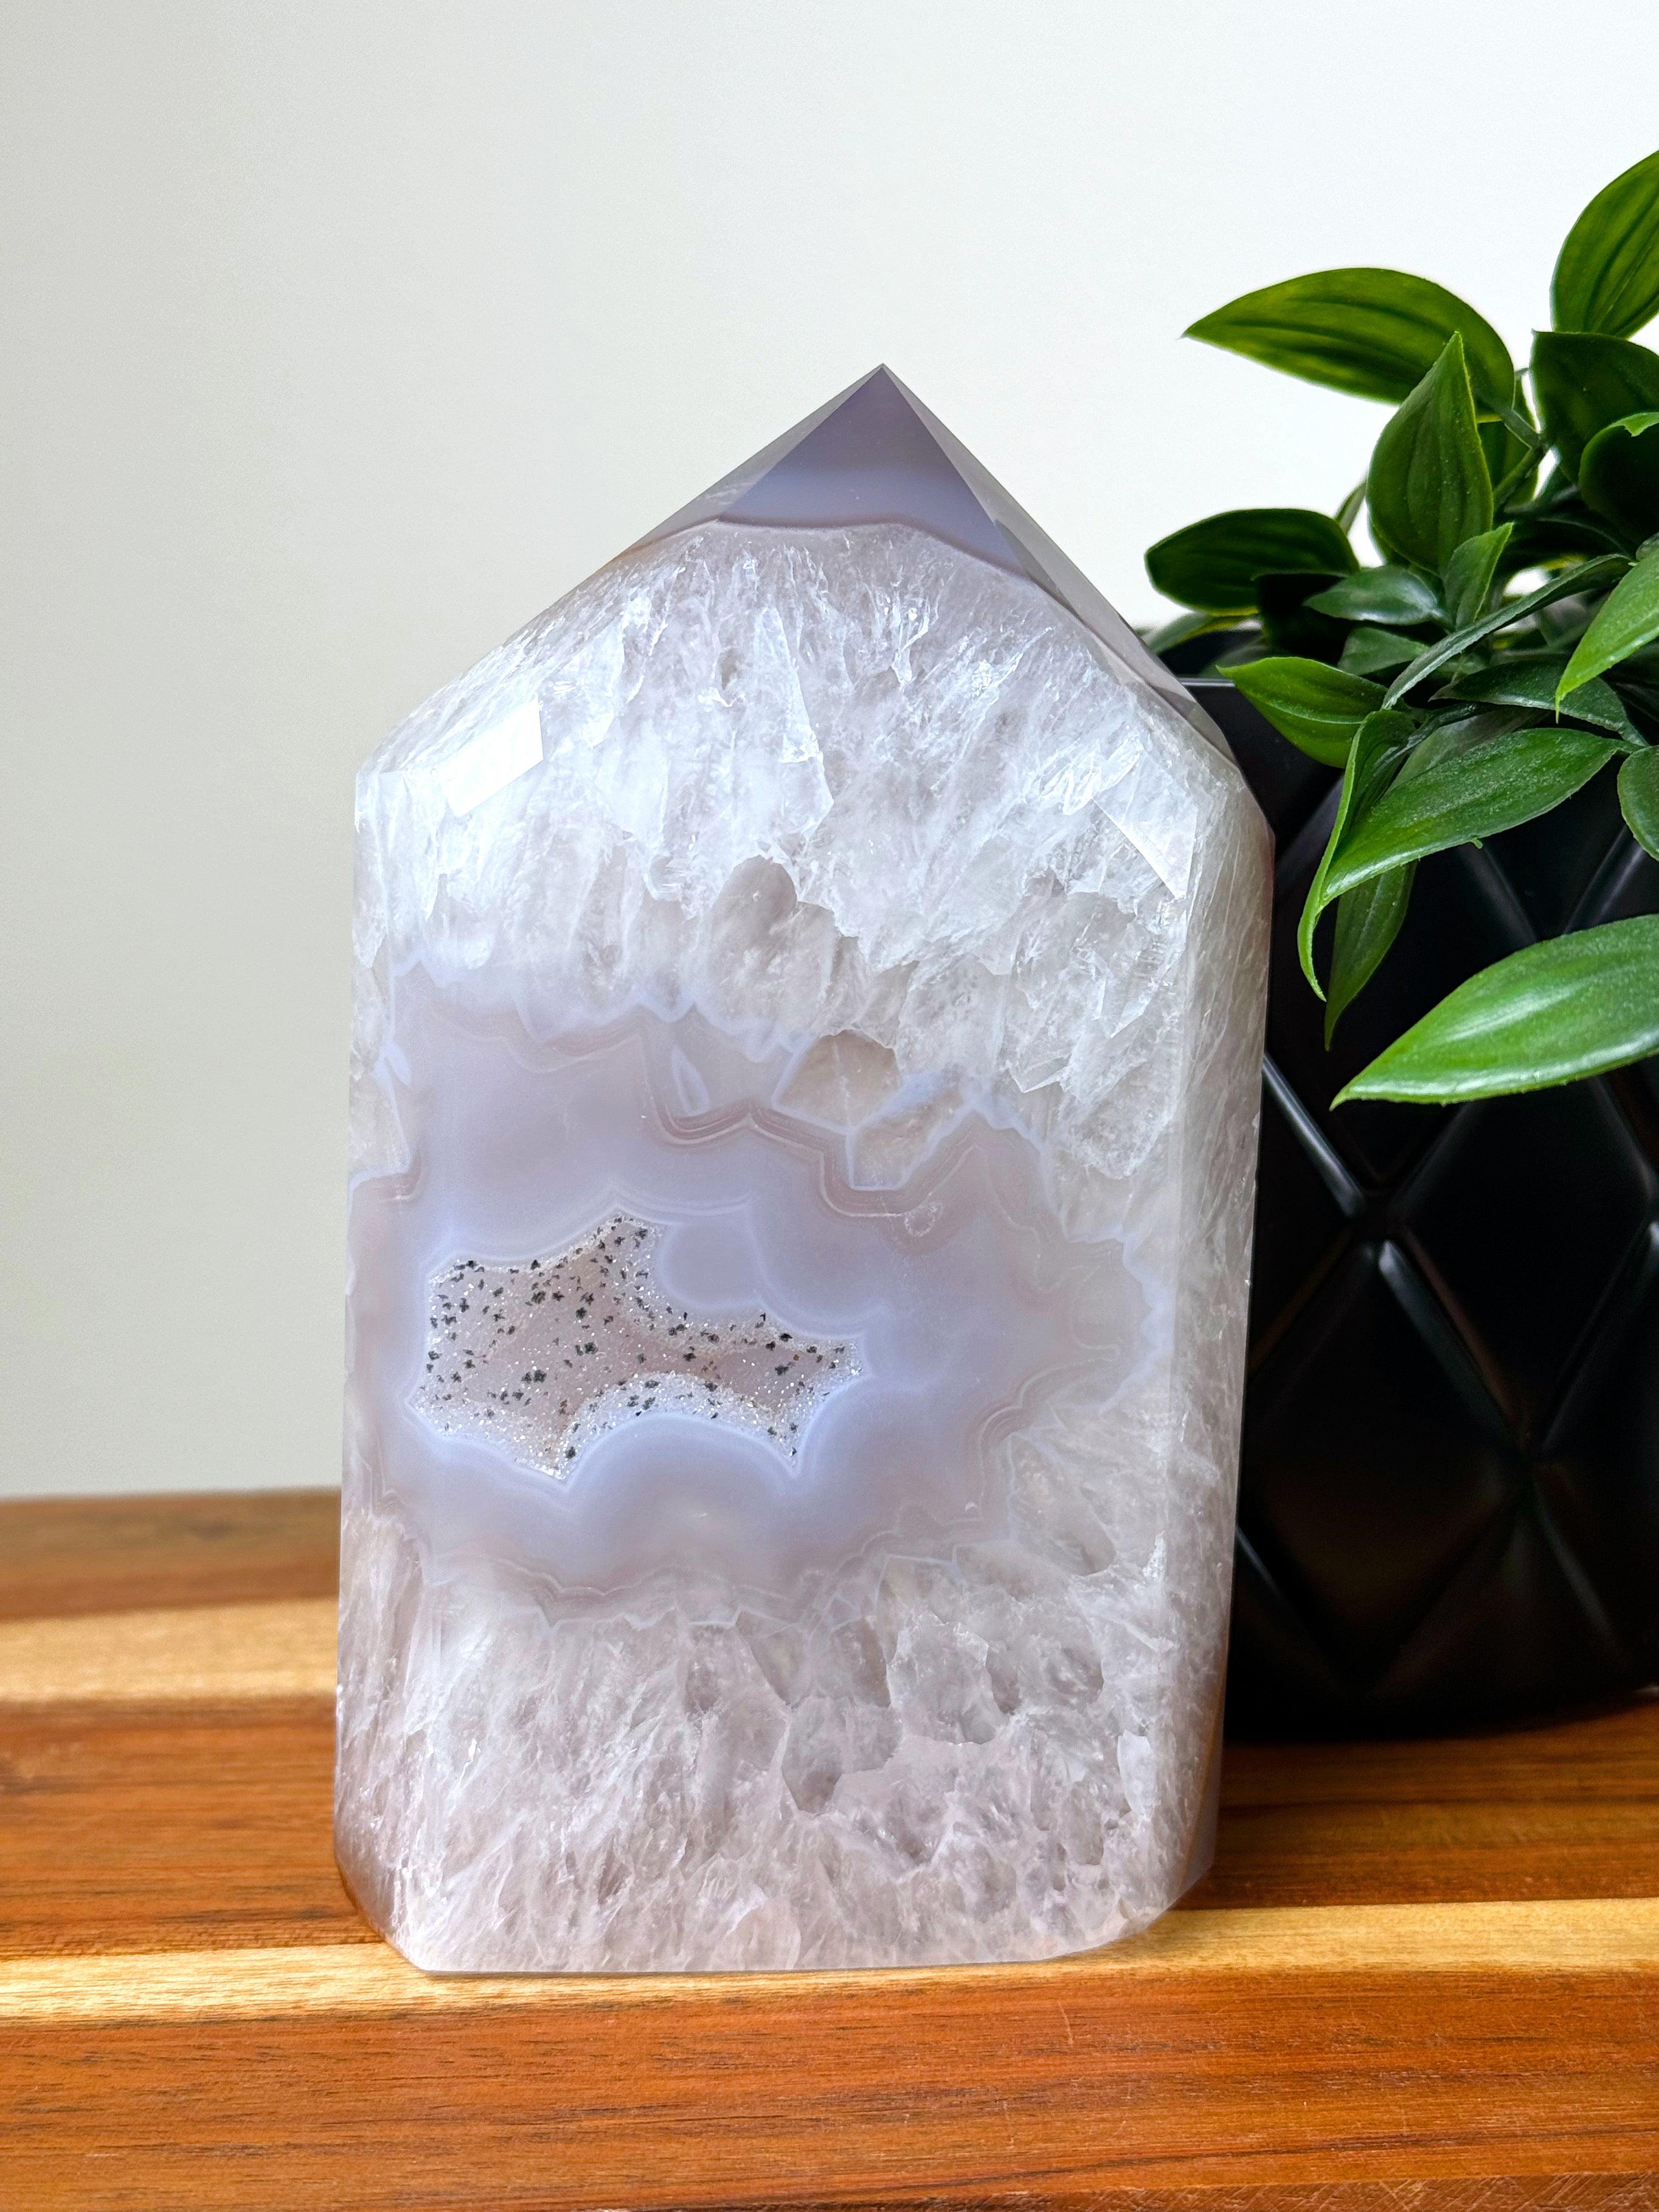 DRUZY AGATE TOWER 3 - agate, druzy agate, googly agate, googly eye, googly eye agate, one of a kind, point, statement piece, tower - The Mineral Maven